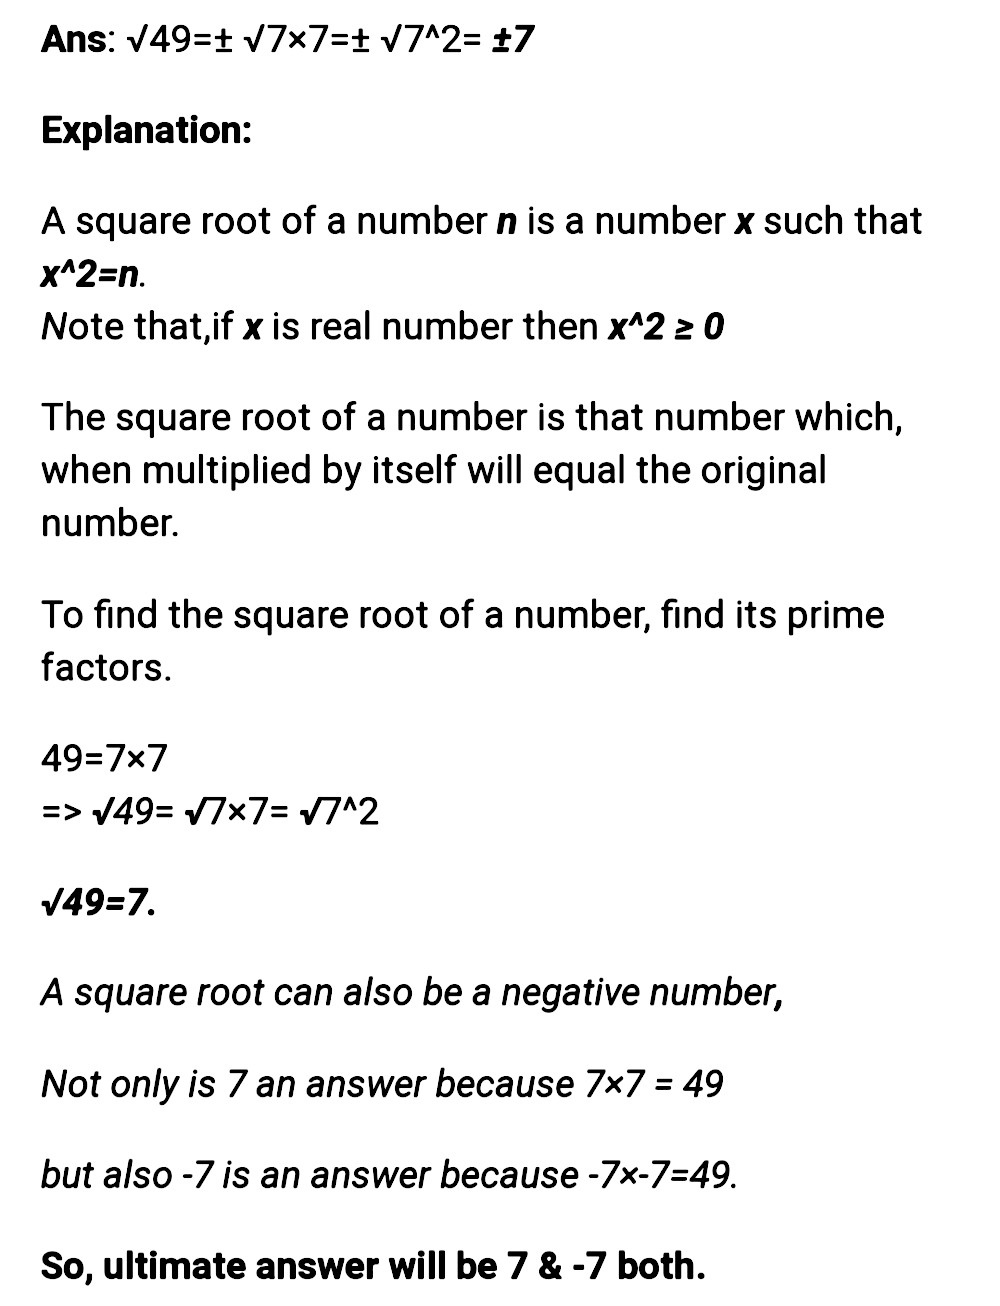 Square root of 49